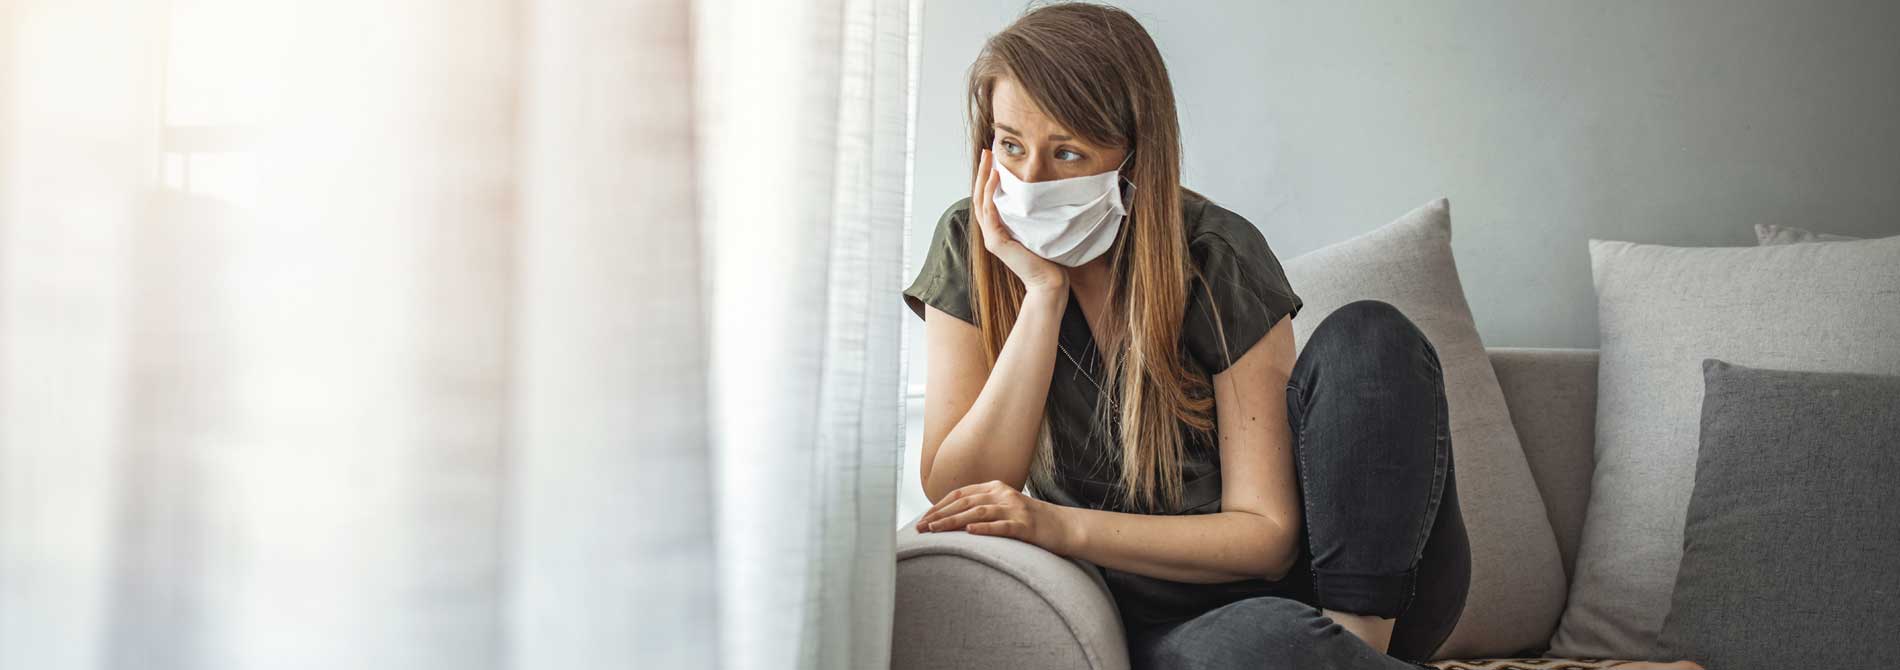 woman indoors wearing surgical mask looking out window